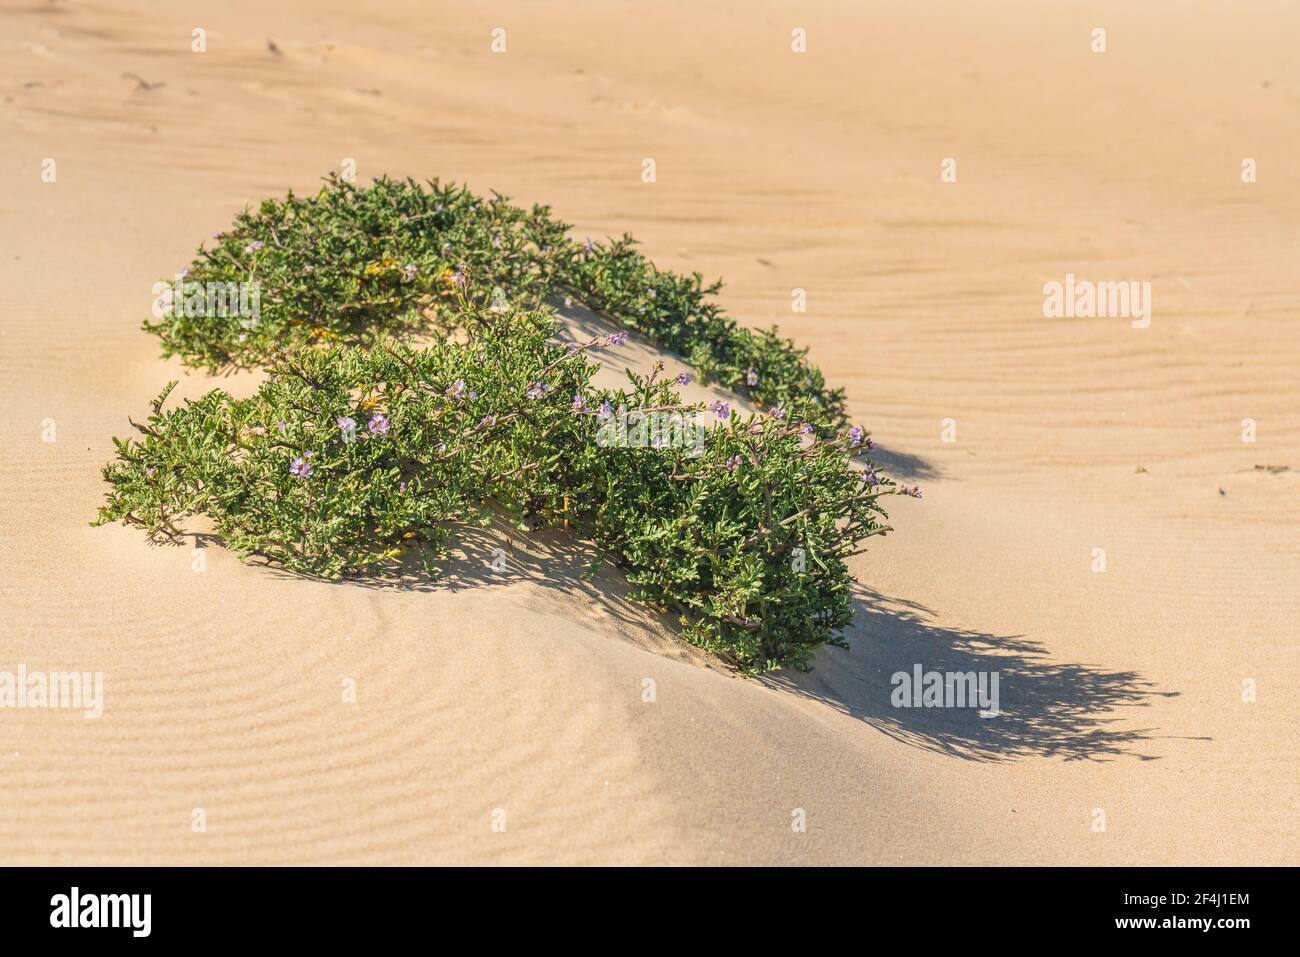 Wildflowers growing on the sandy beach. Sea Rocket flowers in bloom. Sea Rocket is a succulent - a low growing plant commonly found near sea or ocean. Stock Photo